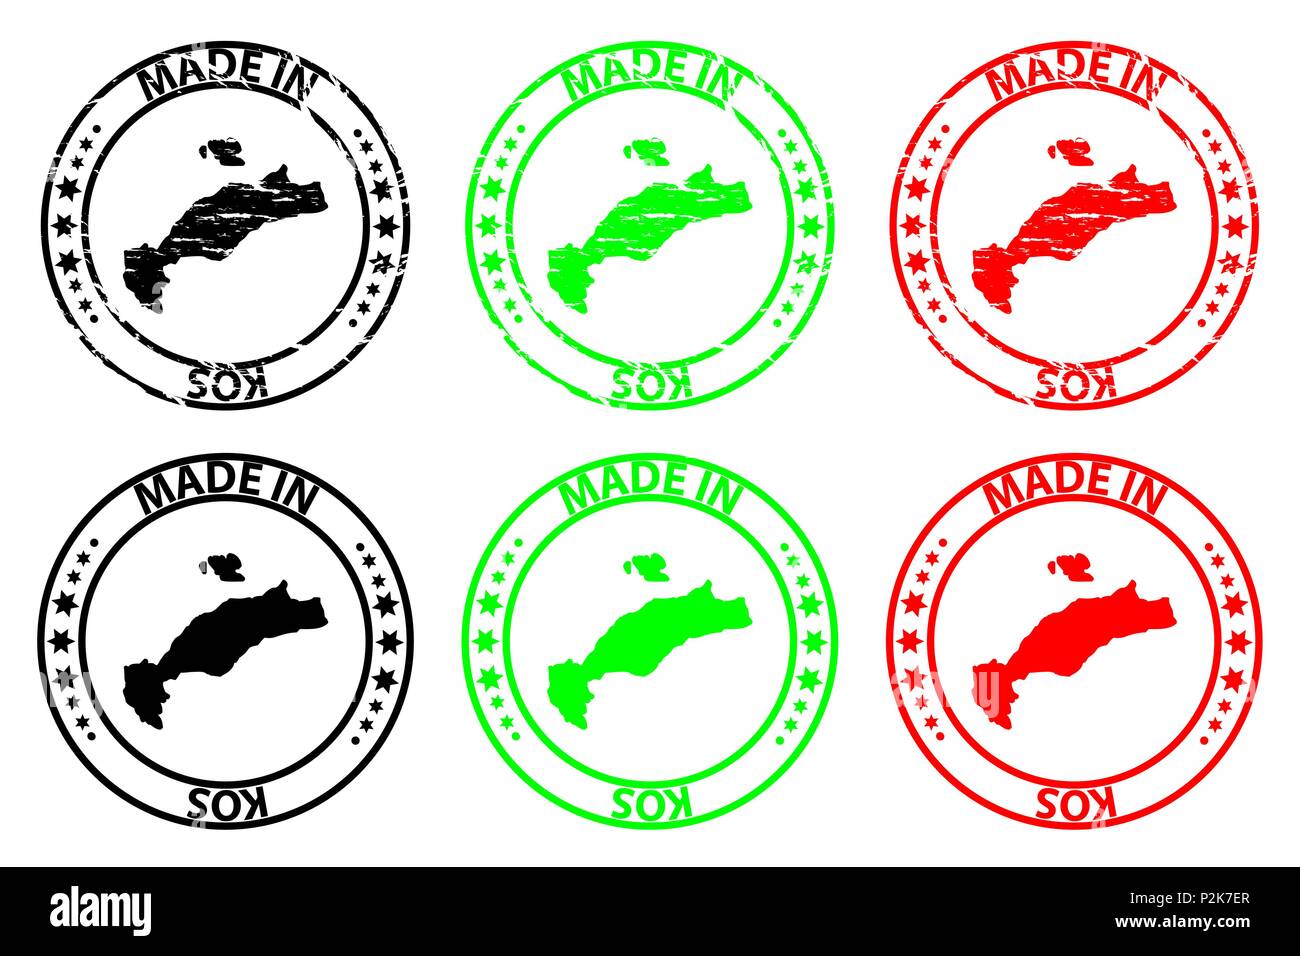 Made in Kos - rubber stamp - vector, Kos(Cos) map pattern - black, green and red Stock Vector